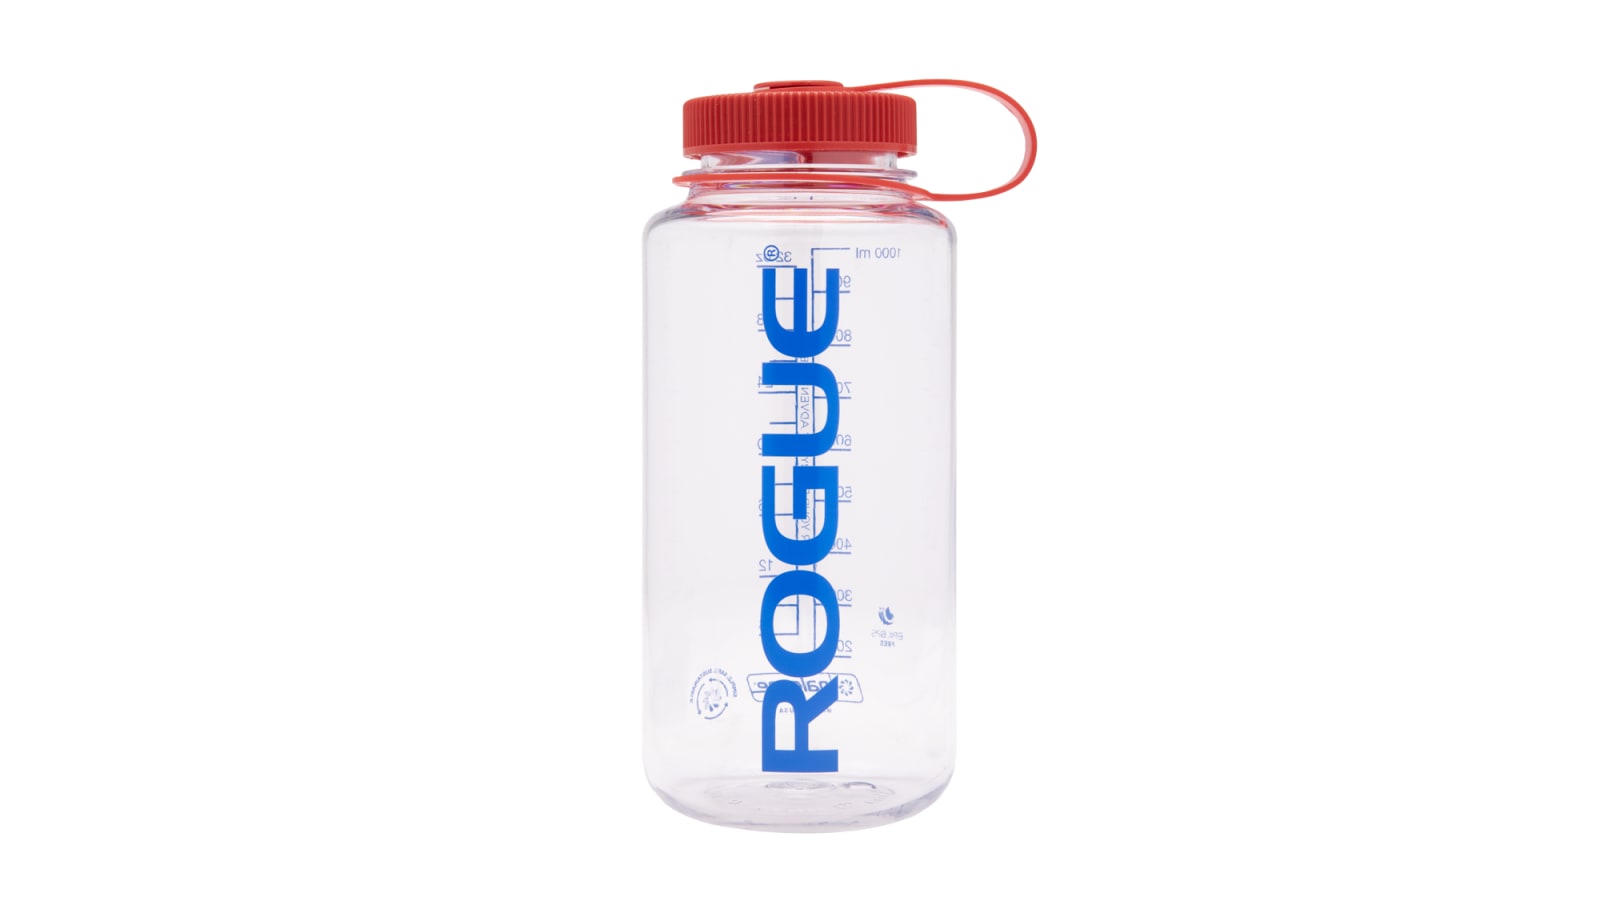 https://assets.roguefitness.com/f_auto,q_auto,c_limit,w_1600,b_rgb:ffffff/catalog/Gear%20and%20Accessories/Accessories/Shakers%20and%20Bottles/NL0011/NL0011-H_e9mhh0.png